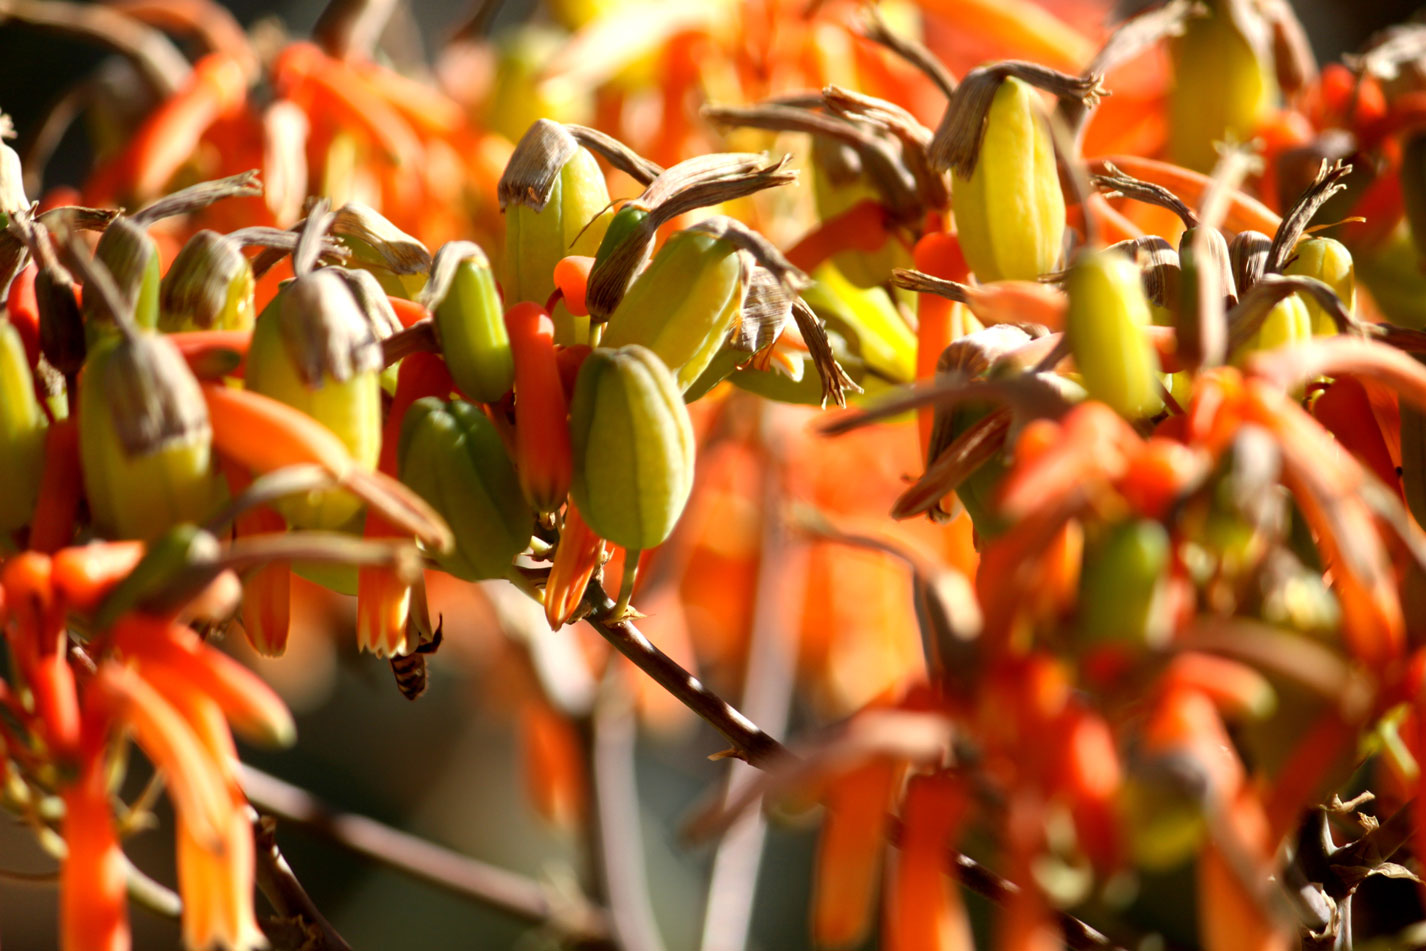 A close up of a mass of Coral Aloe flowers and bright green seed pods.